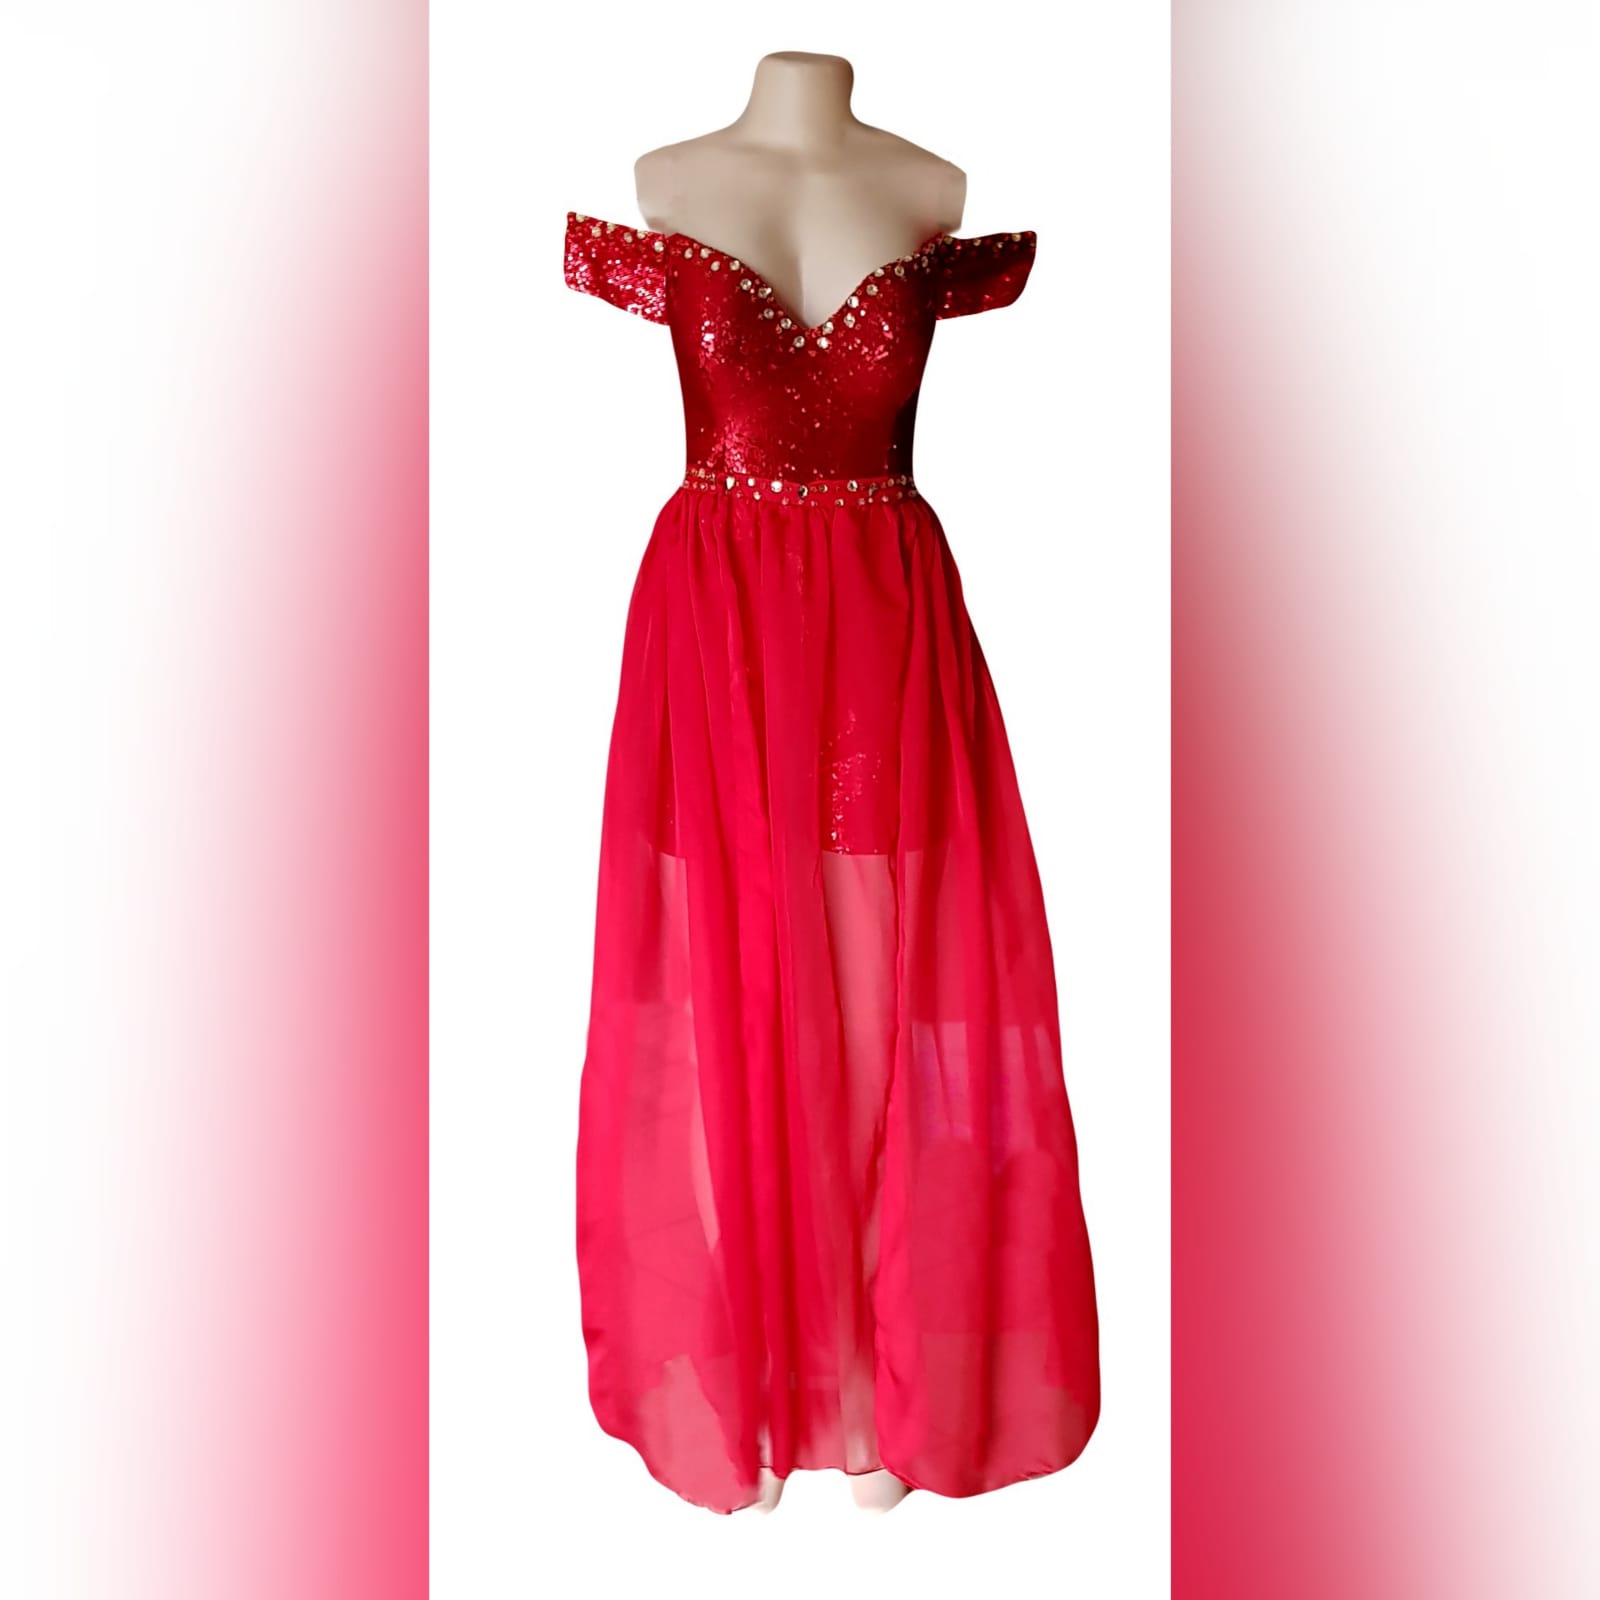 2 piece red sequins evening dress 1 2 piece red sequins evening dress. Short leg off shoulder sweetheart neckline bodysuit with a sheer long detachable skirt with 2 slits. Detailed with gold beads.